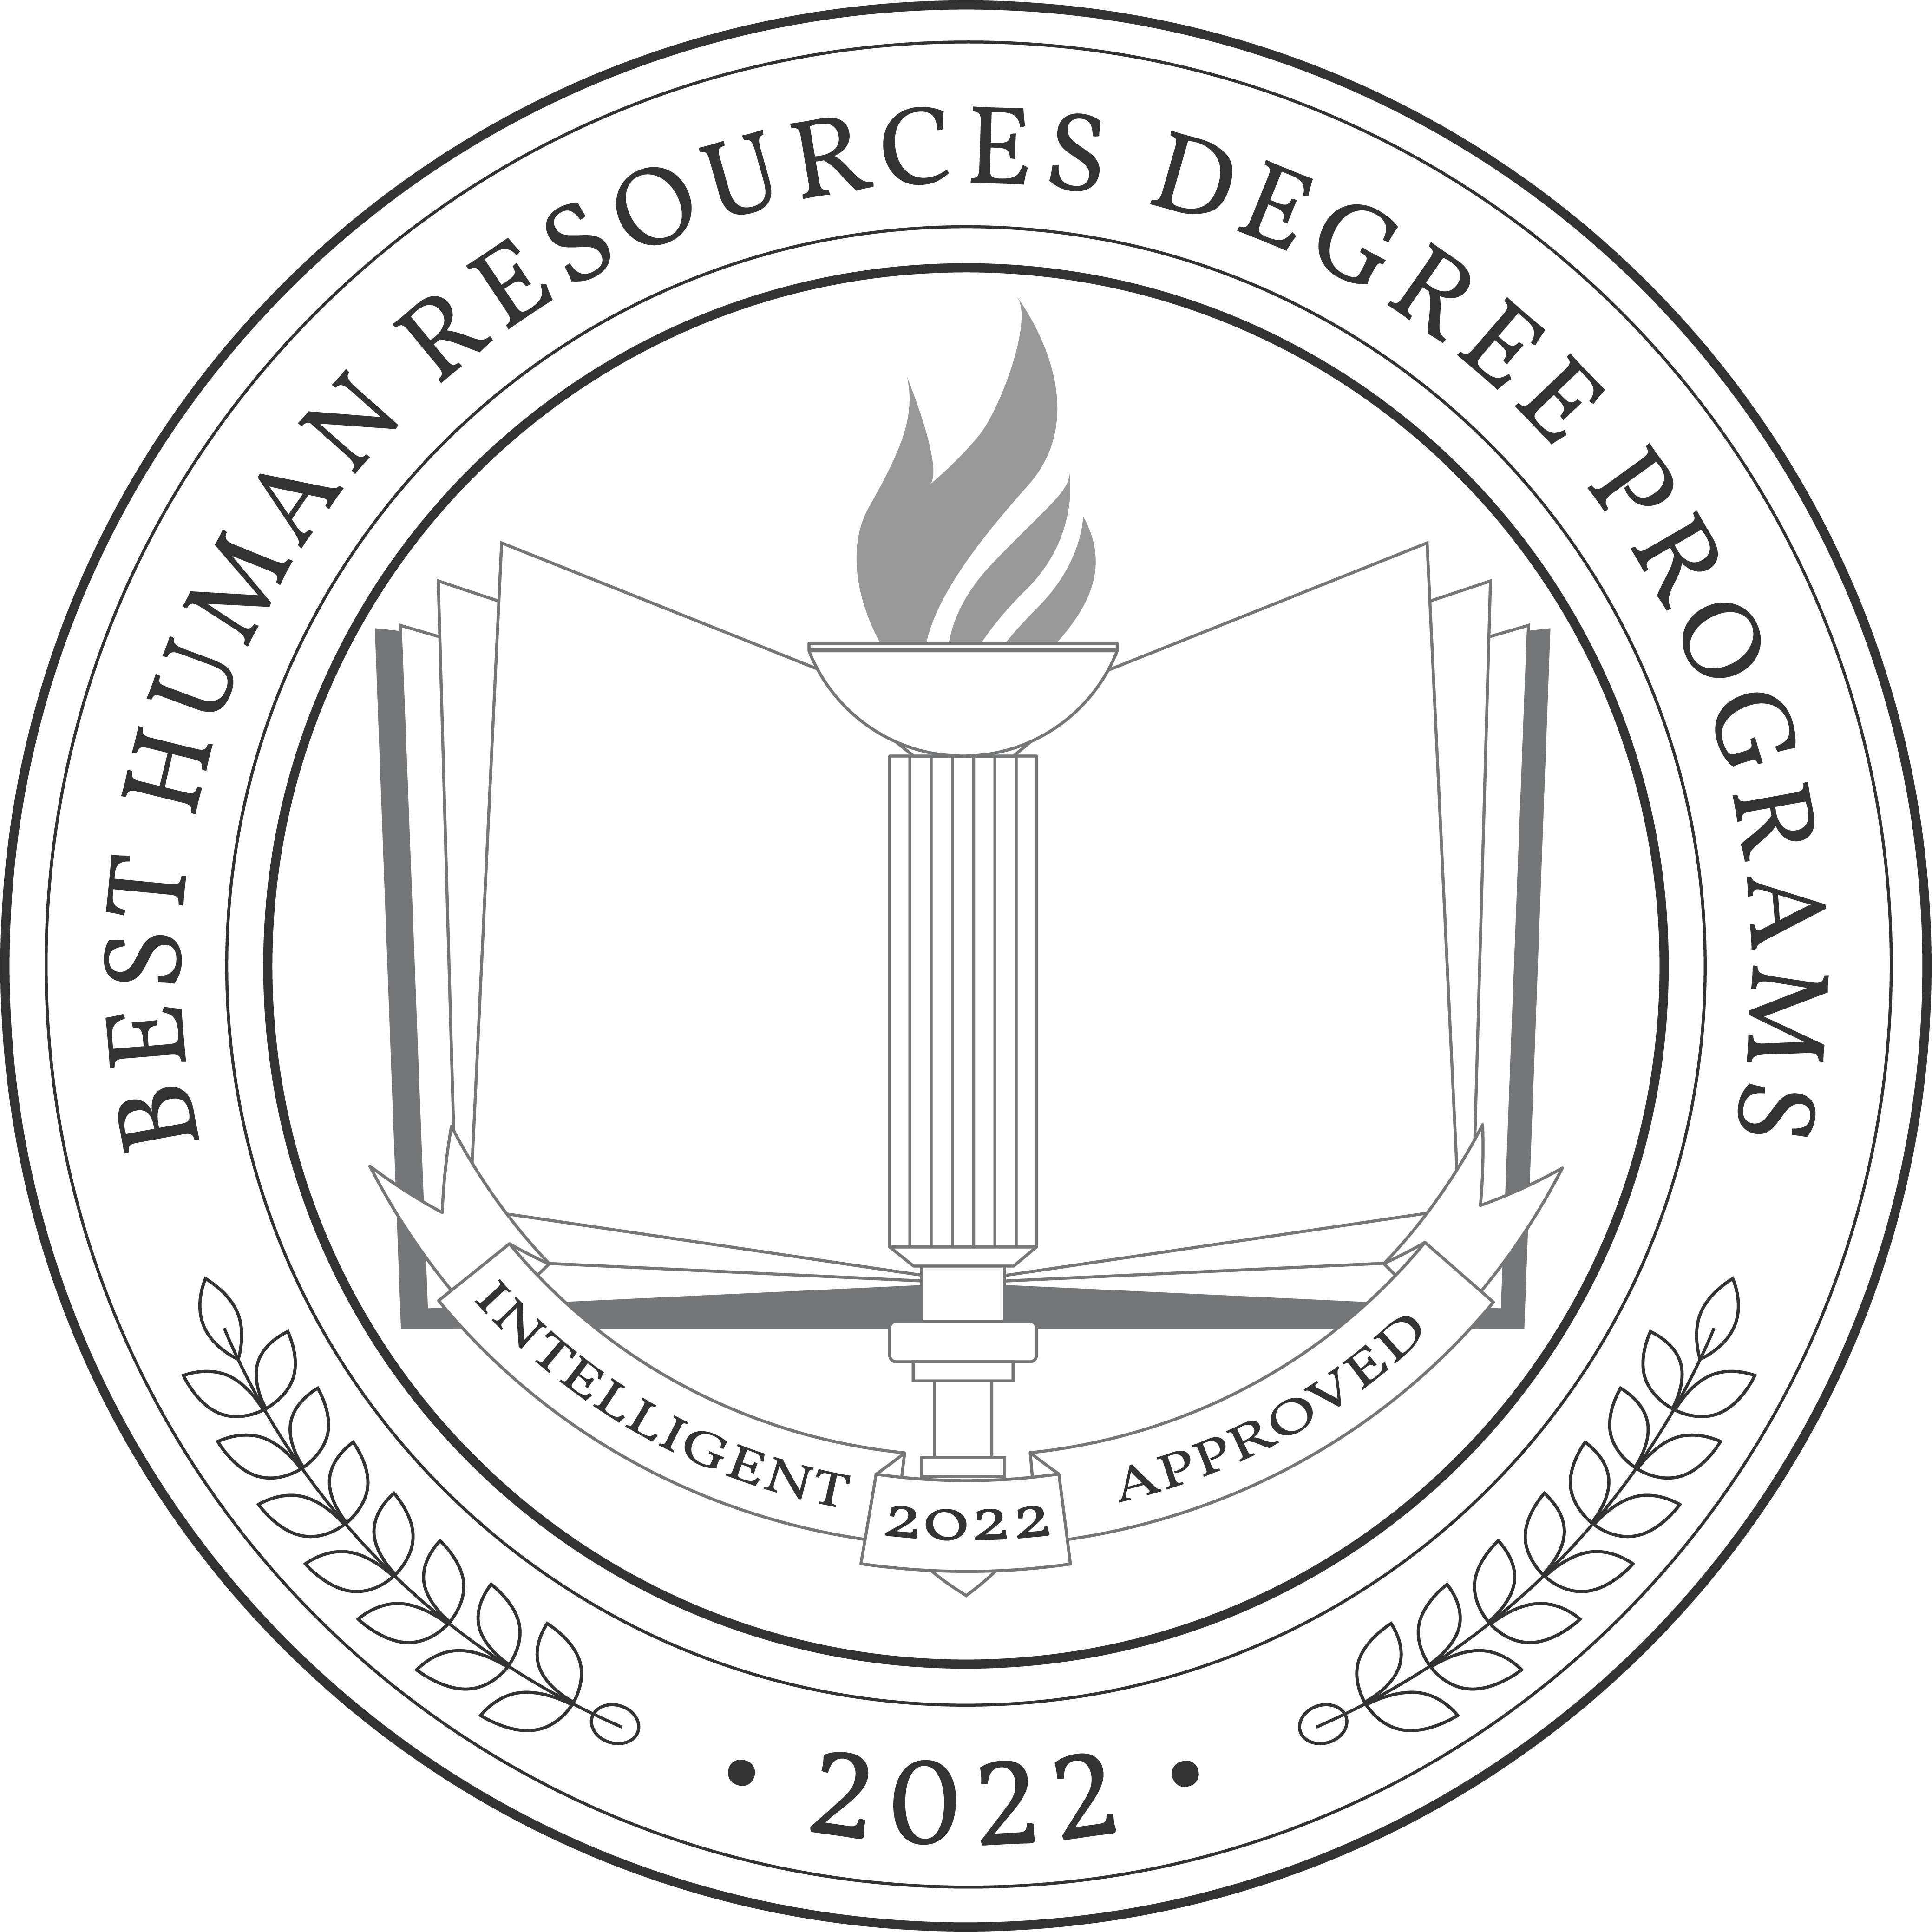 best-human-resources-degree-programs-badge.png